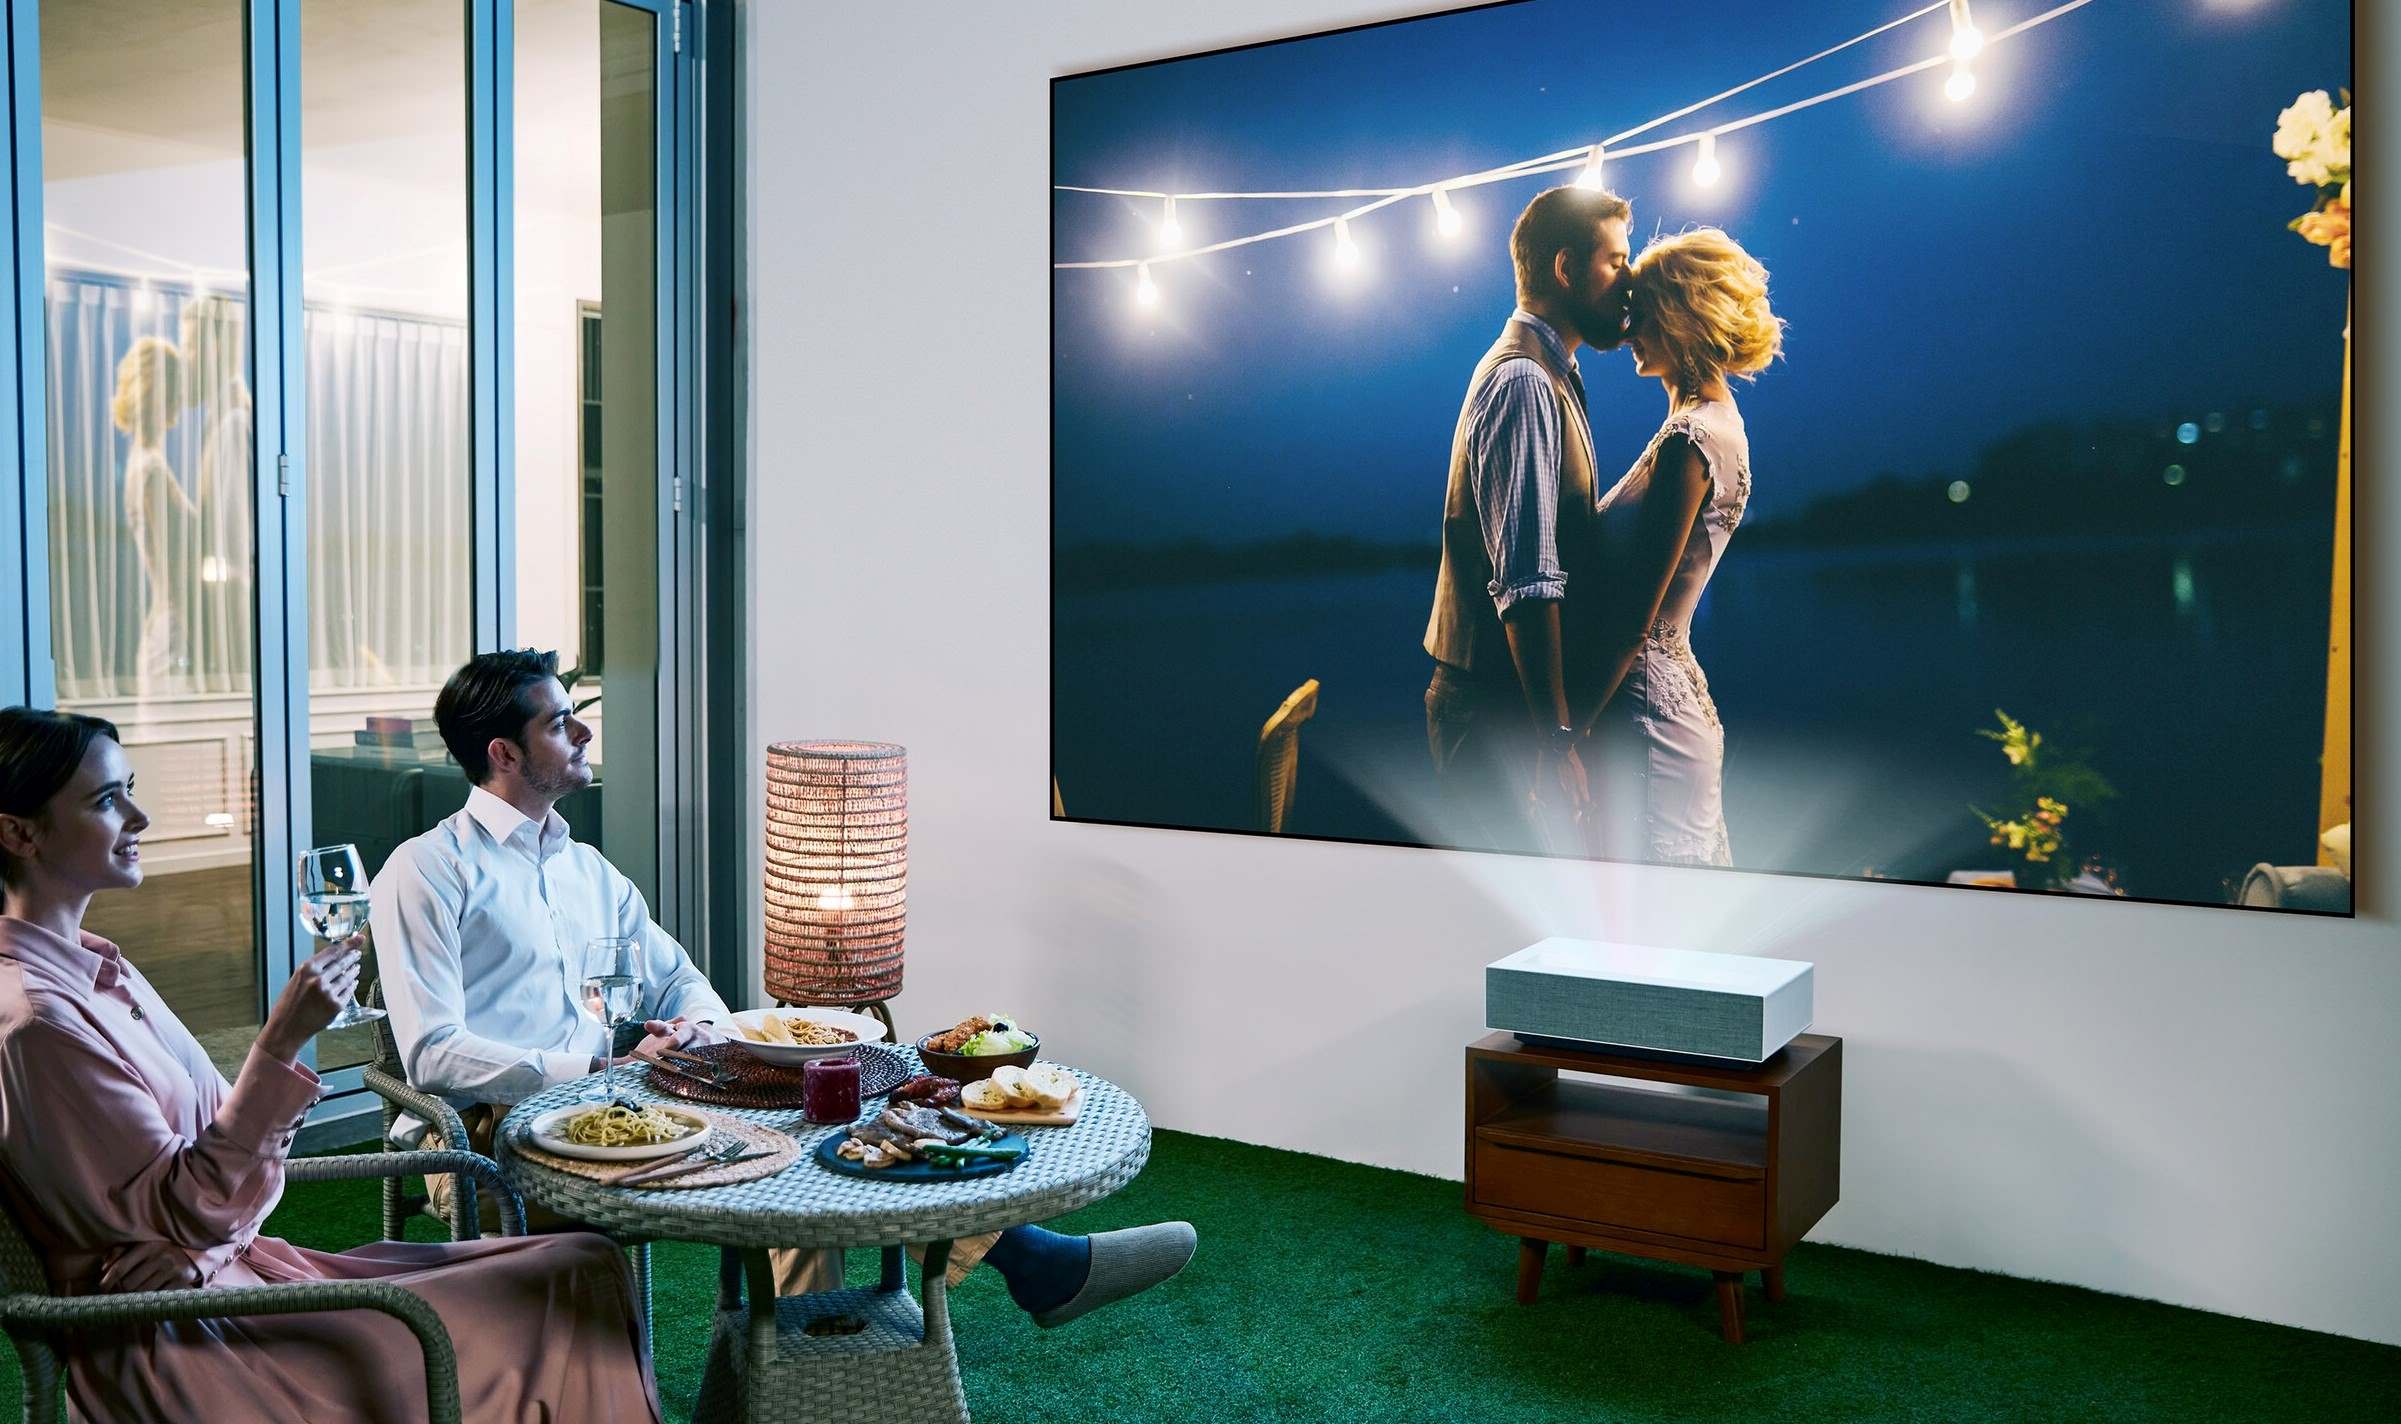 Should You Buy An Ultra Short Throw Projector?